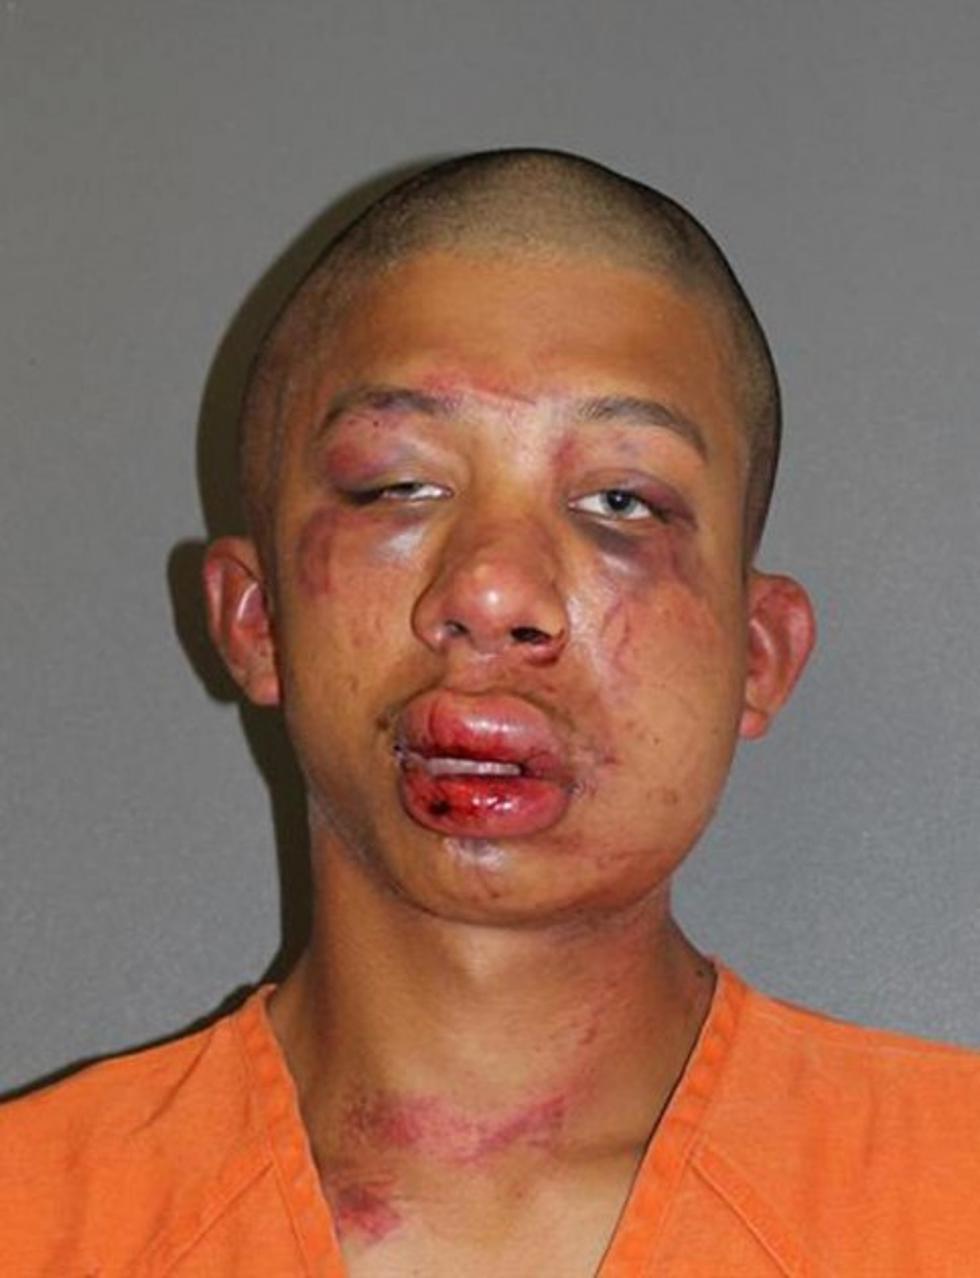 Florida Father Beats Up Babysitter He Catches Sexually Assaulting His Son